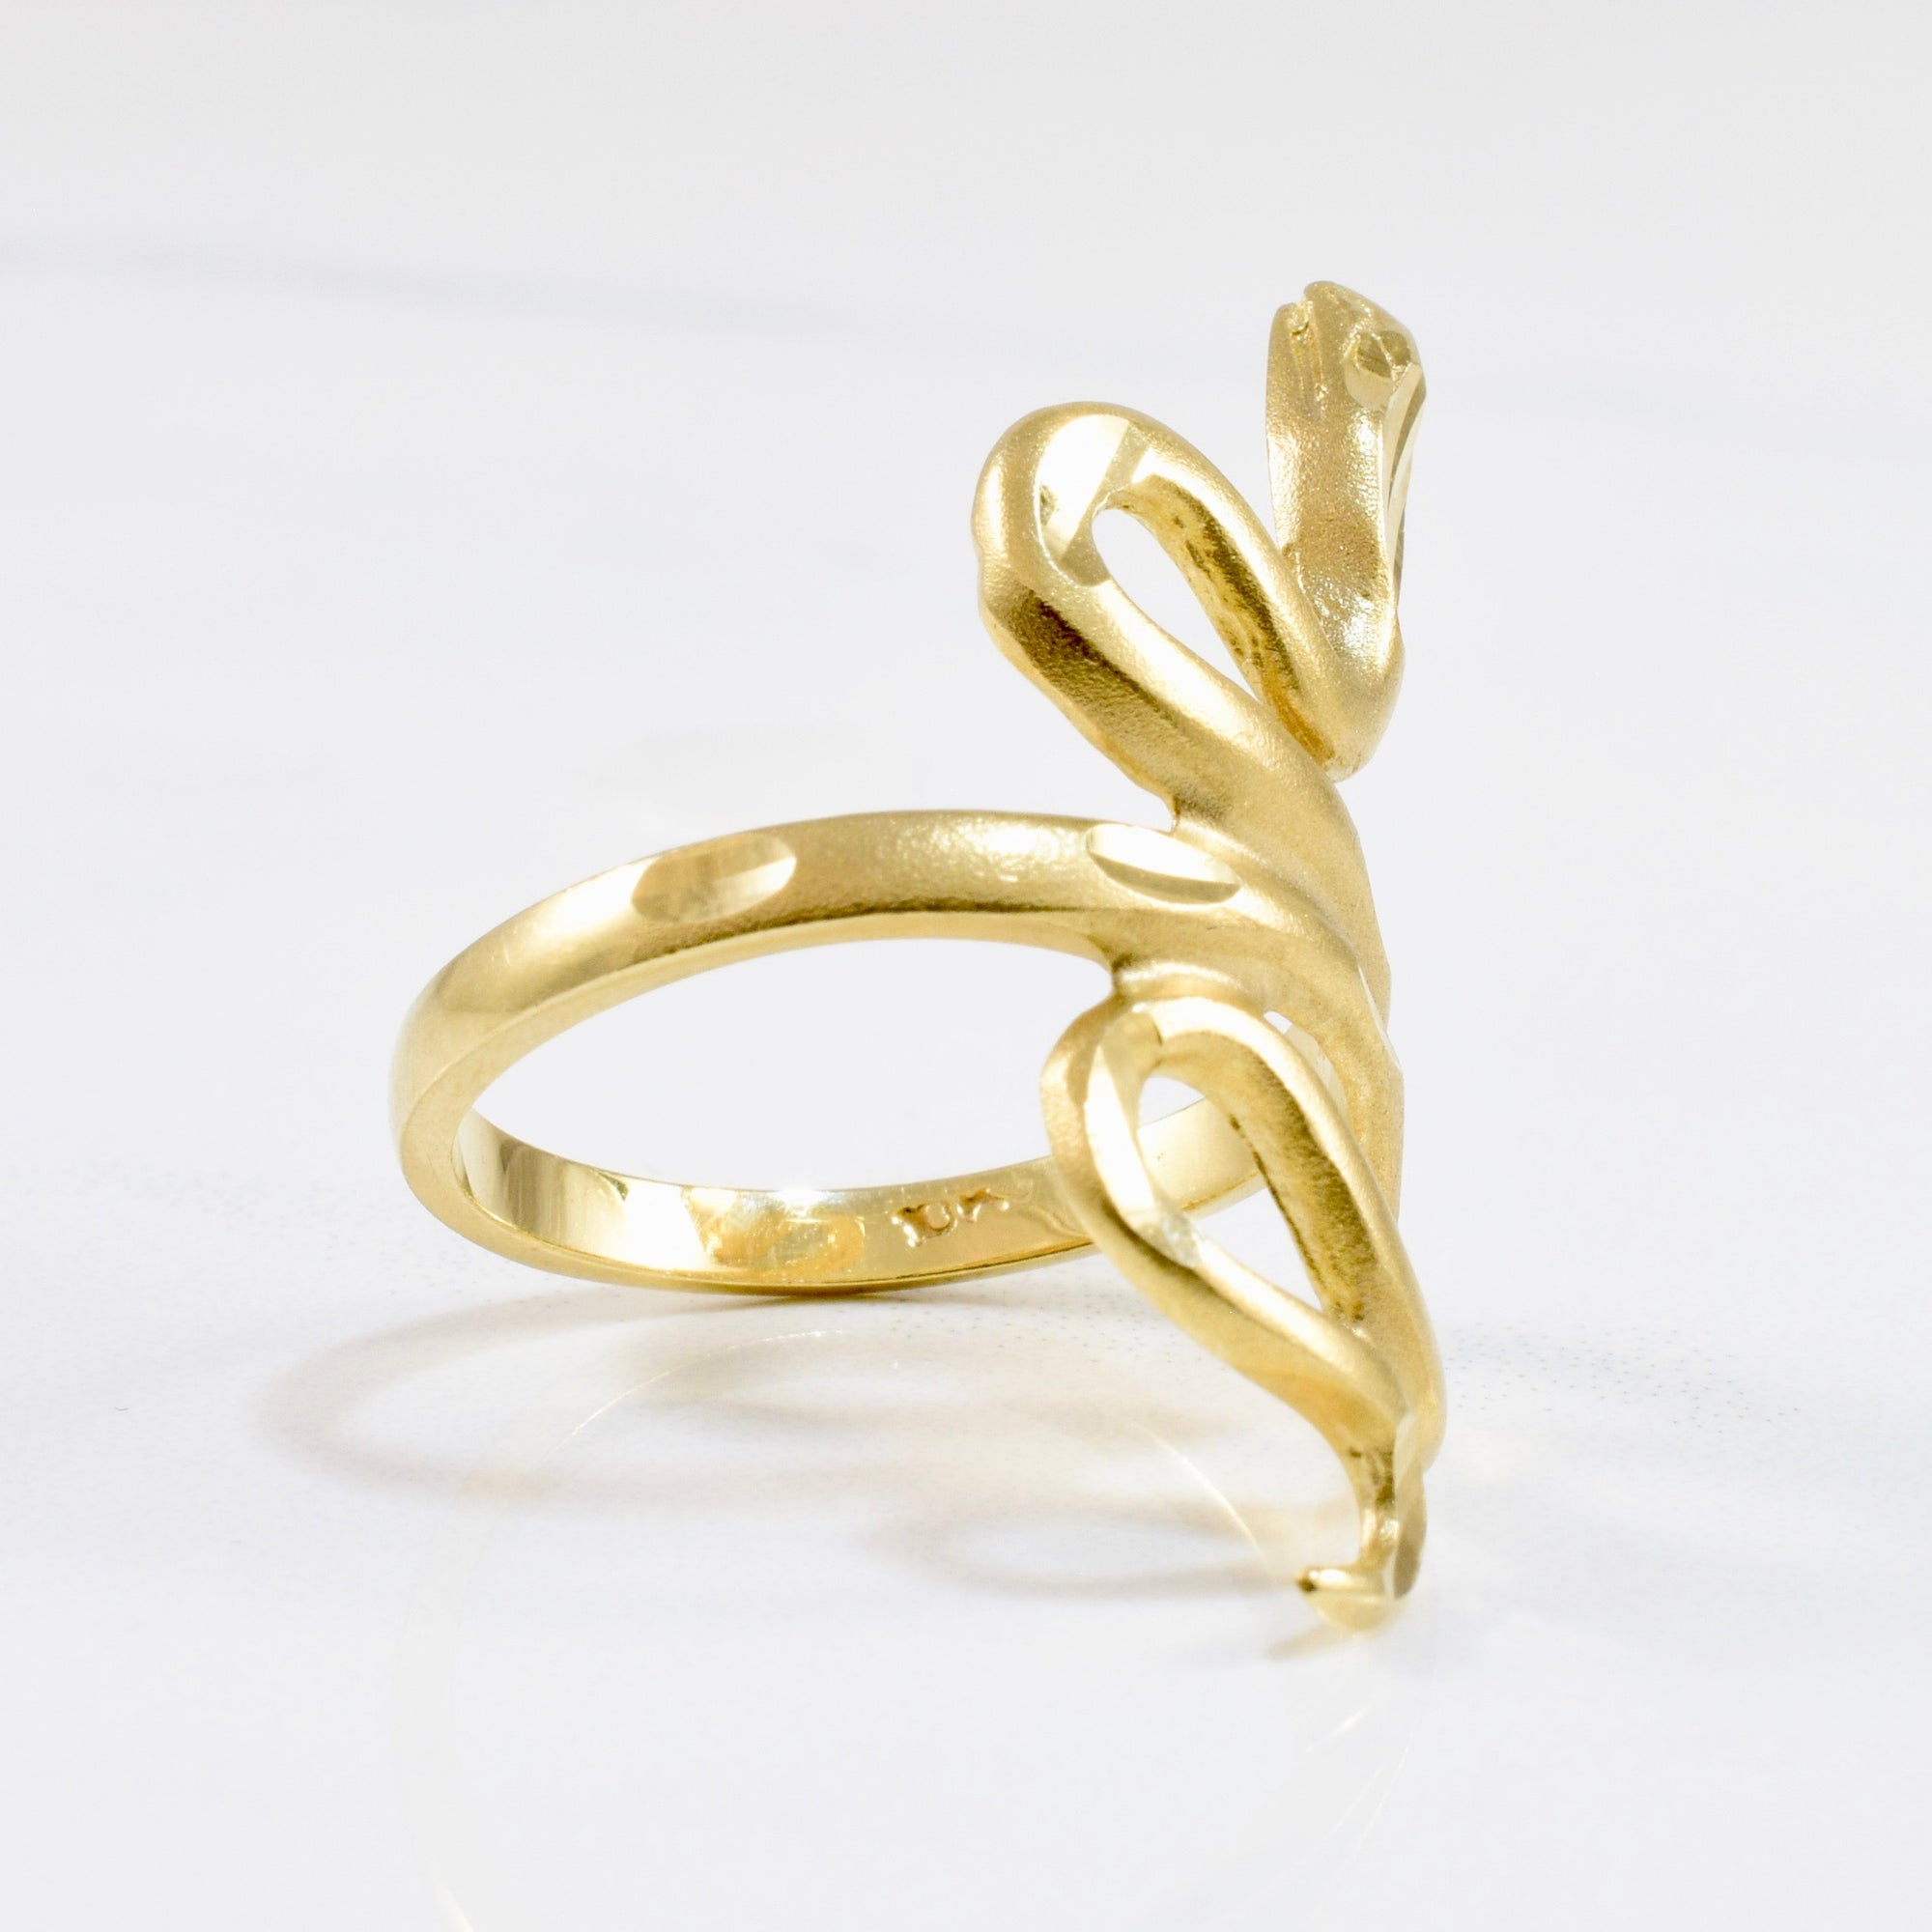 Coiled Snake Ring | SZ 7.25 |